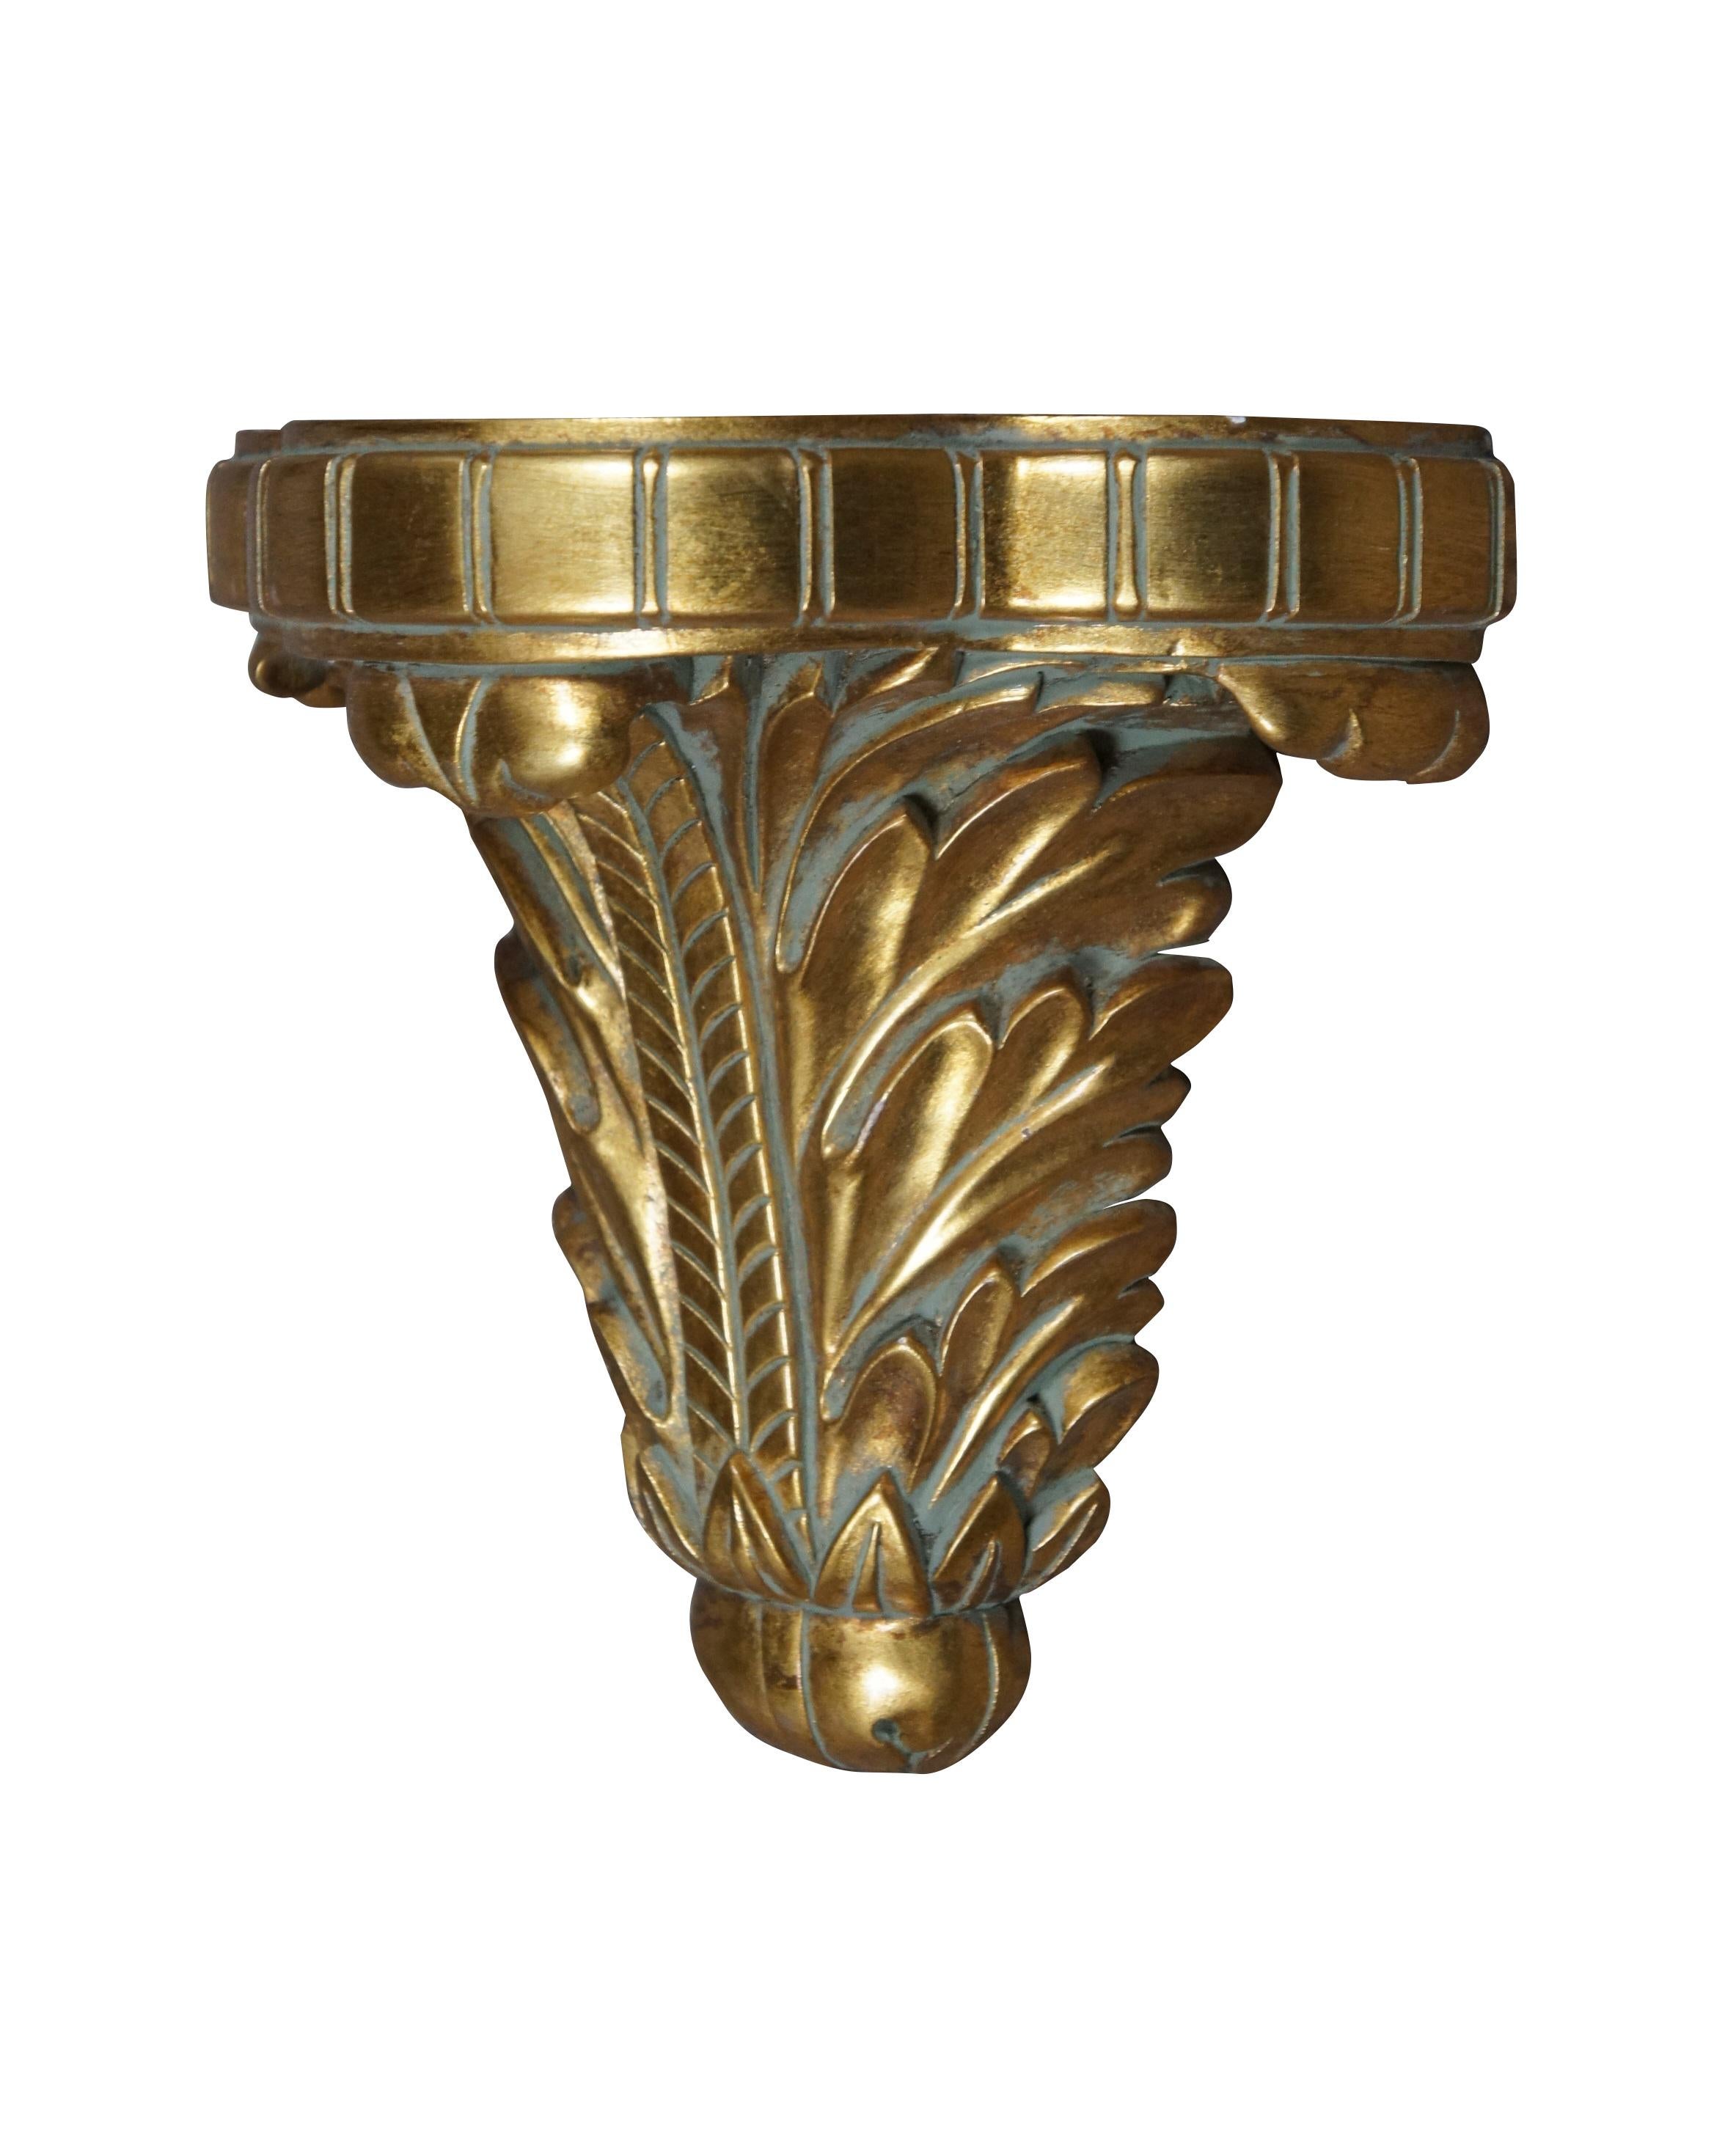 Circa mid 20th century Hollywood Regency style gilt wood wall shelf / sconce carved with acanthus leaves and a lobed demilune top.

DIMENSIONS
9.5